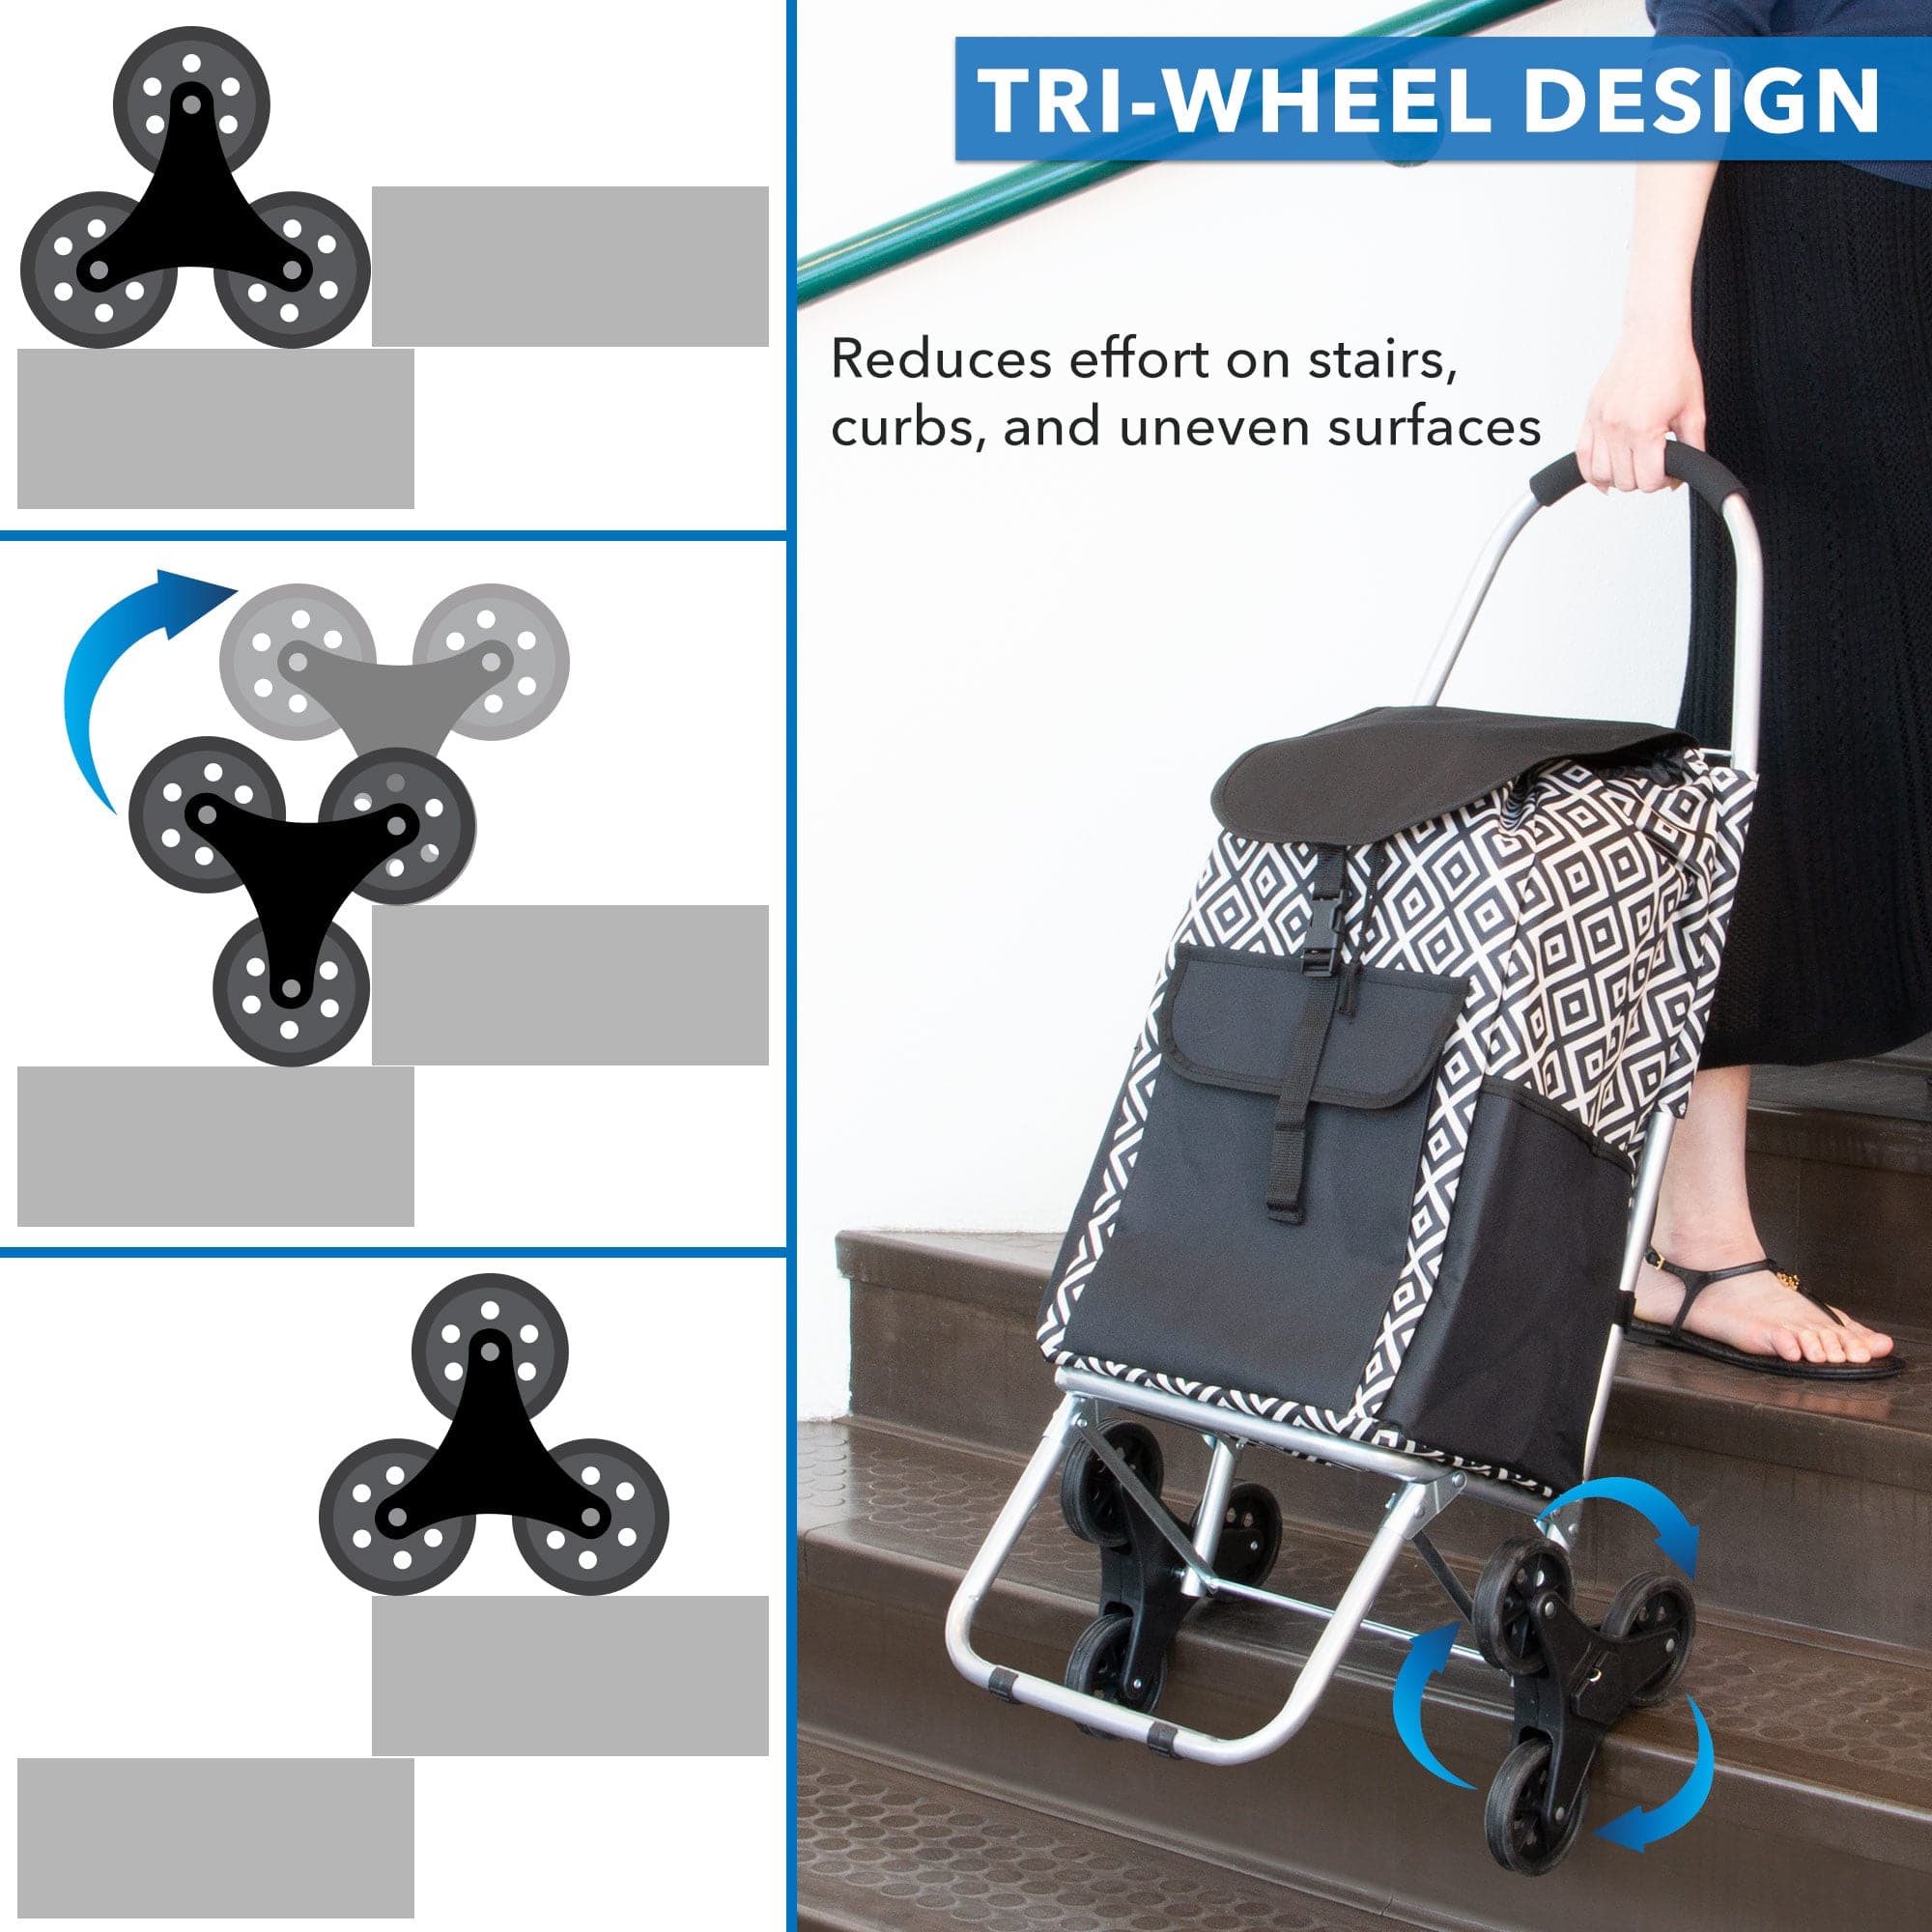 Stair Climber Shopping Cart with Bag - Mount-It!